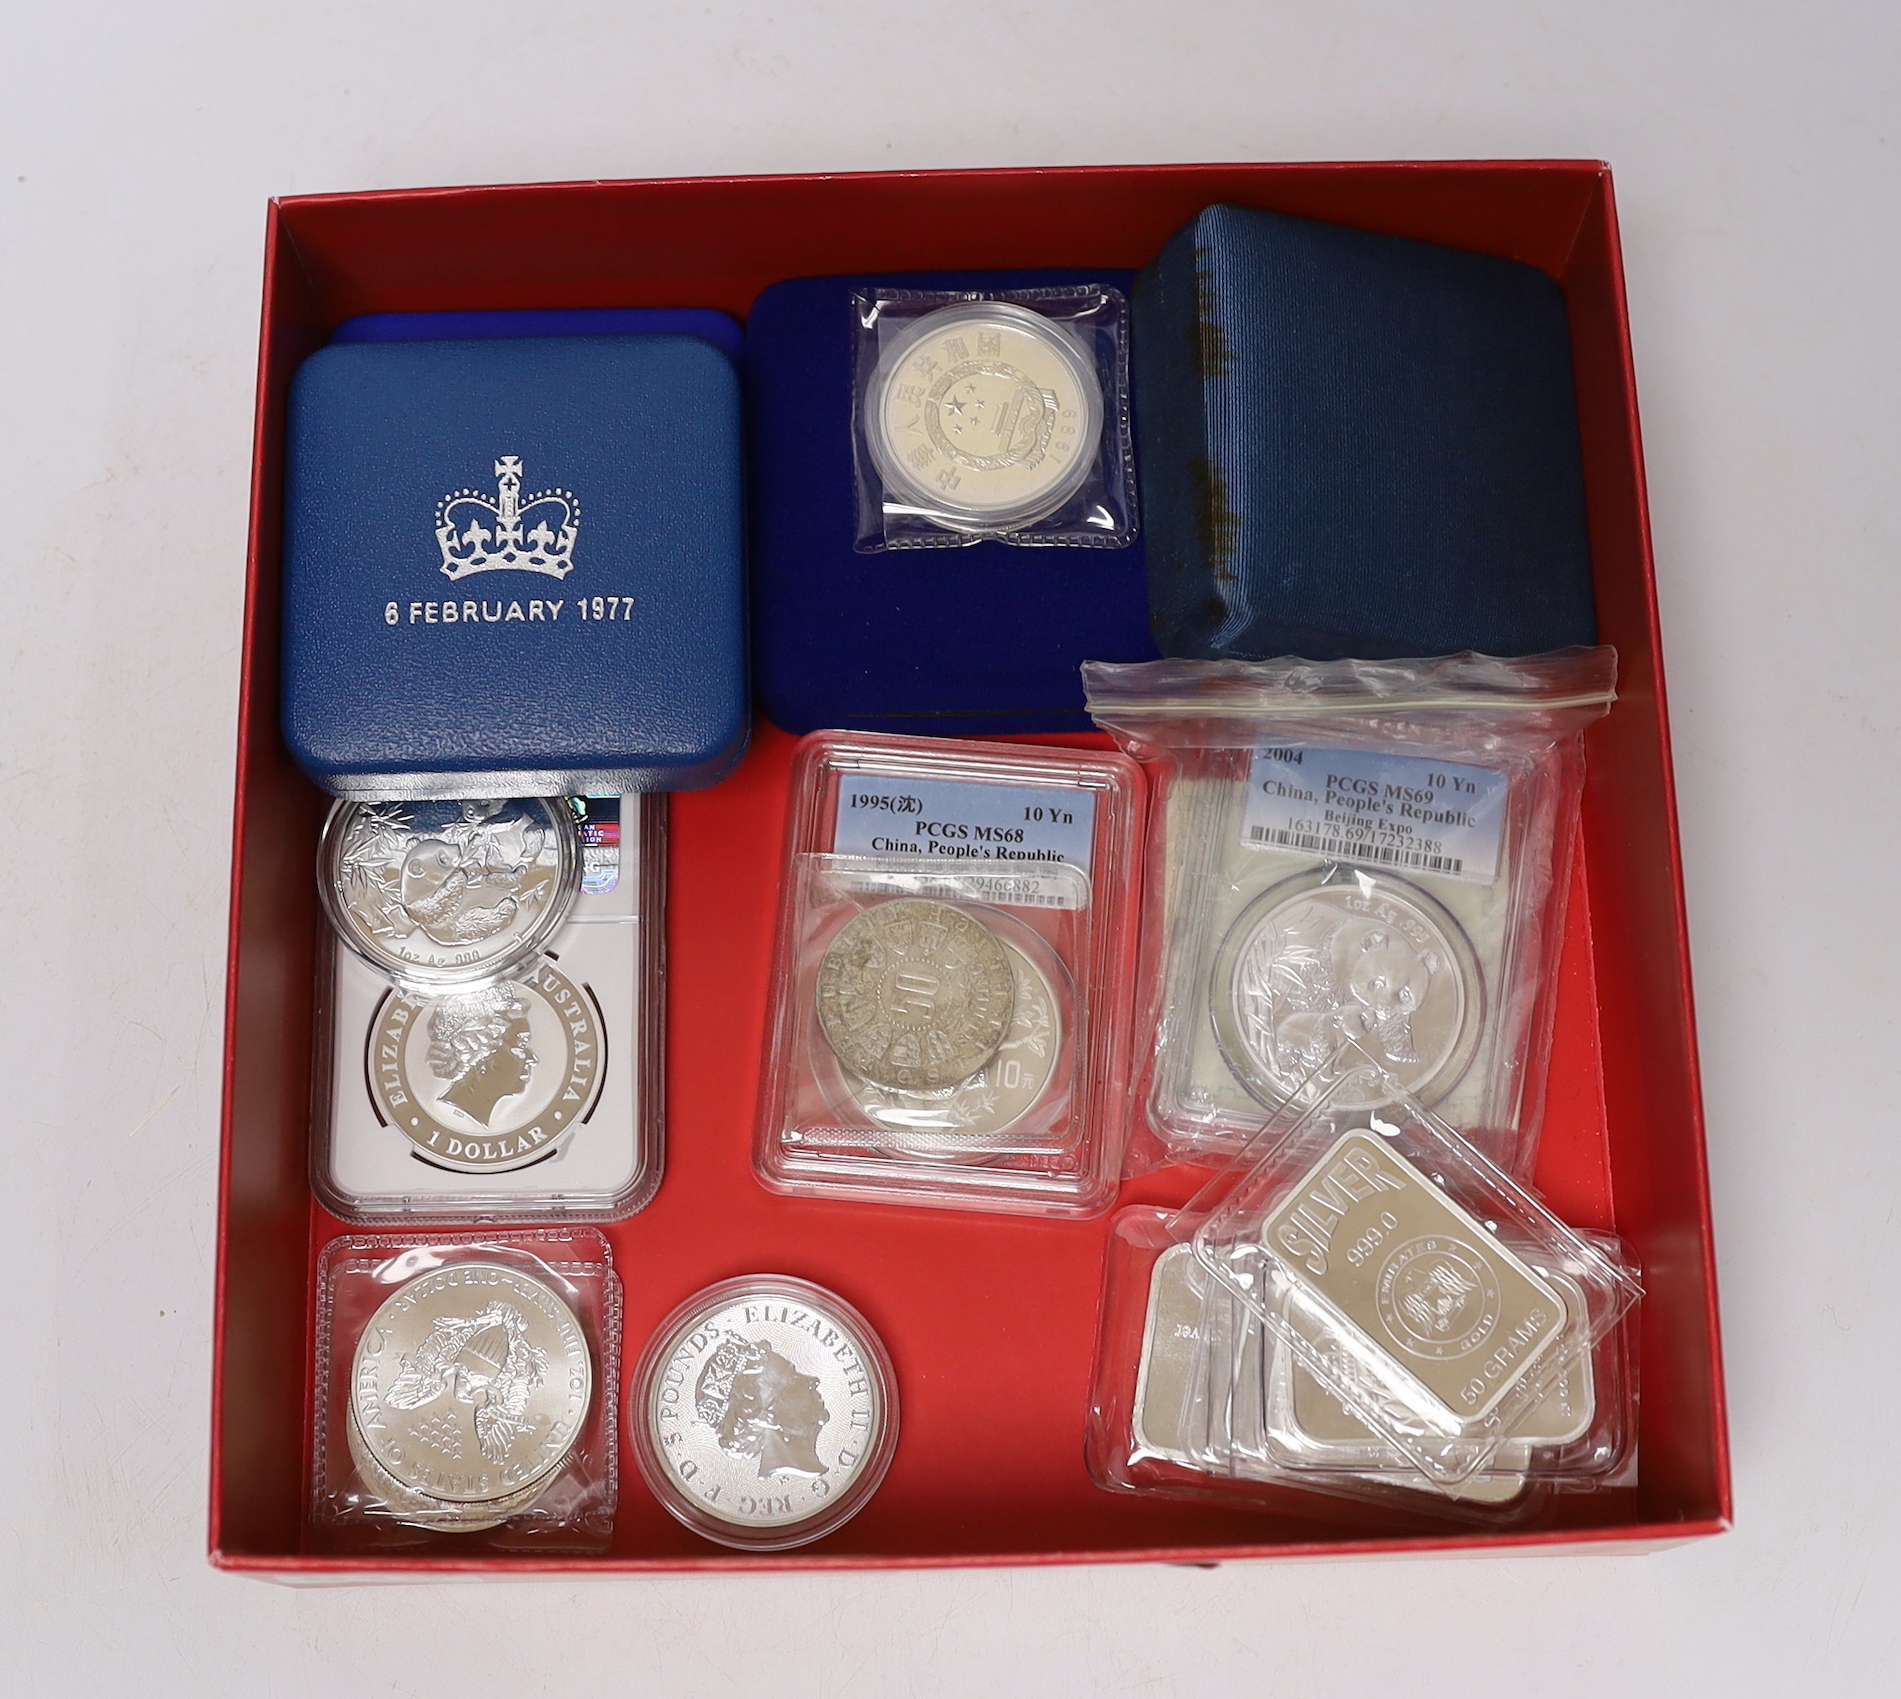 Nineteen silver commemorative coins, medals or silver ingots, including Australia $1 koala 2012p, NGC graded MS 69, People’s Republic China 10 yuan 1995, PCGS graded MS 68 and 10 yuan 2004, PCGS graded MS 69